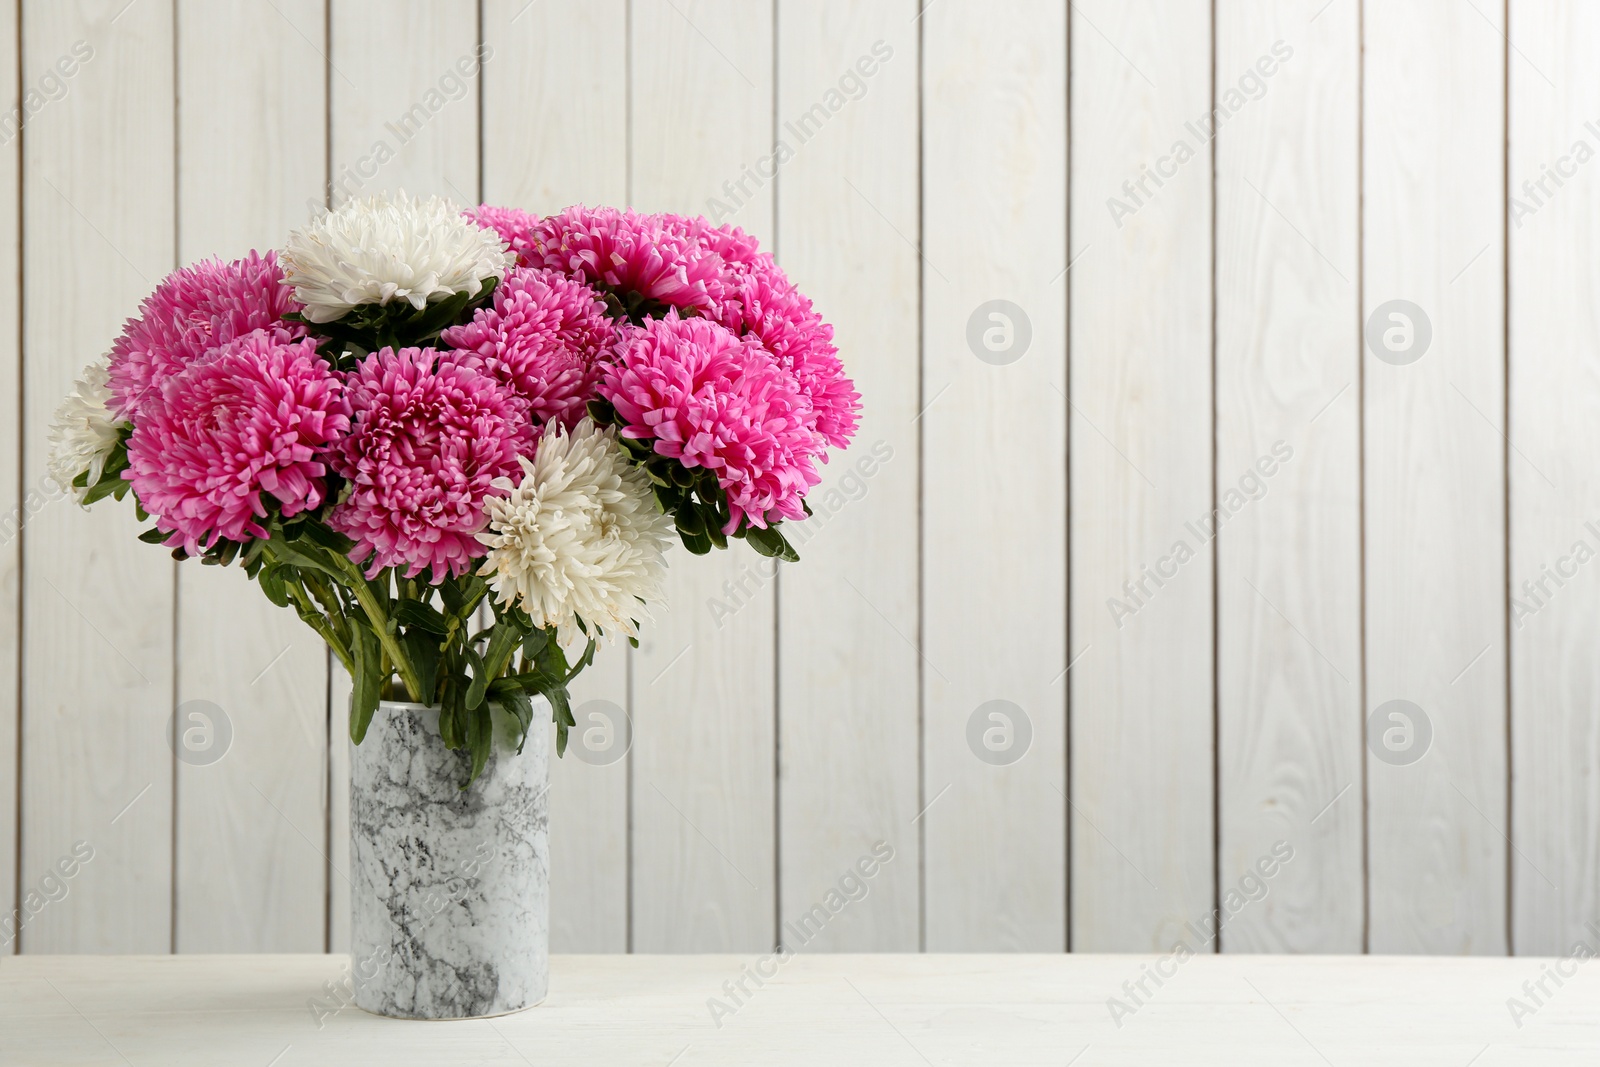 Photo of Beautiful asters in vase on table against white wooden background, space for text. Autumn flowers